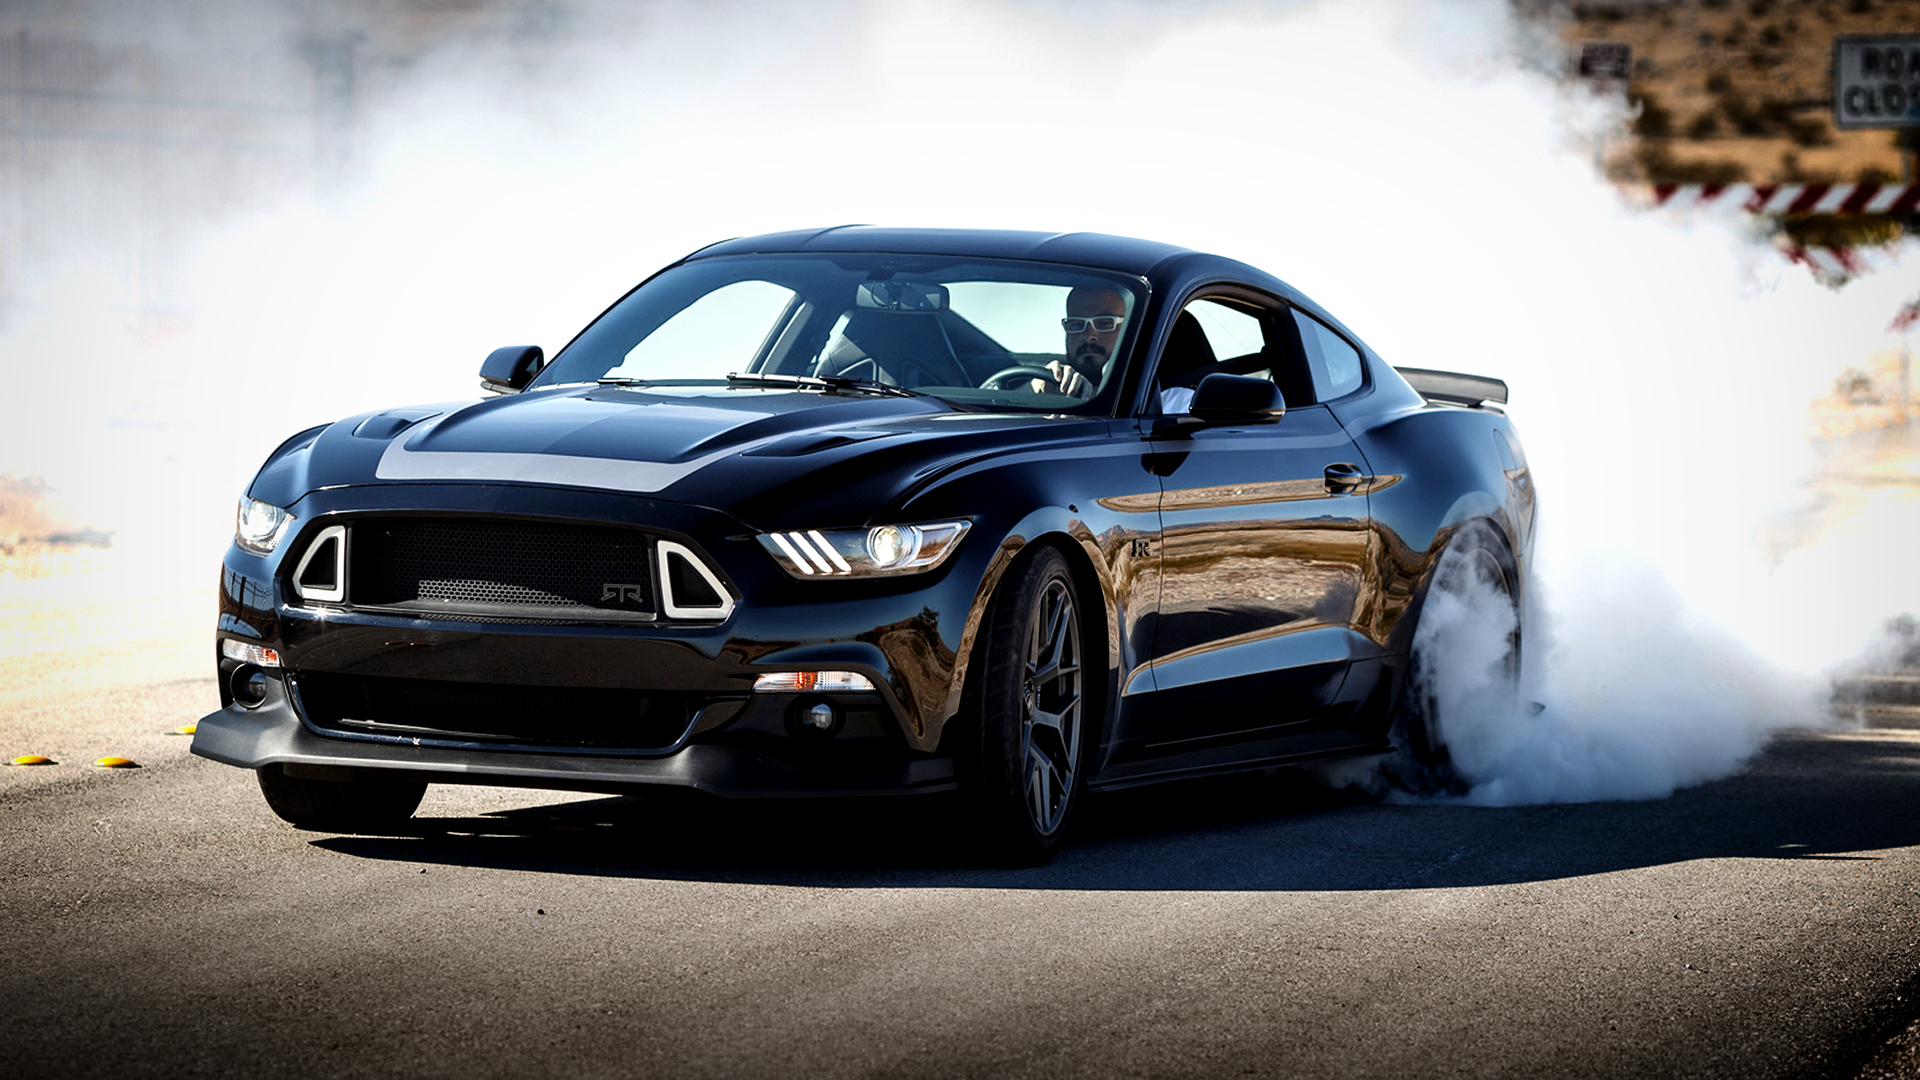 Ford Mustang Rtr Spec Wallpaper Photos Pictures